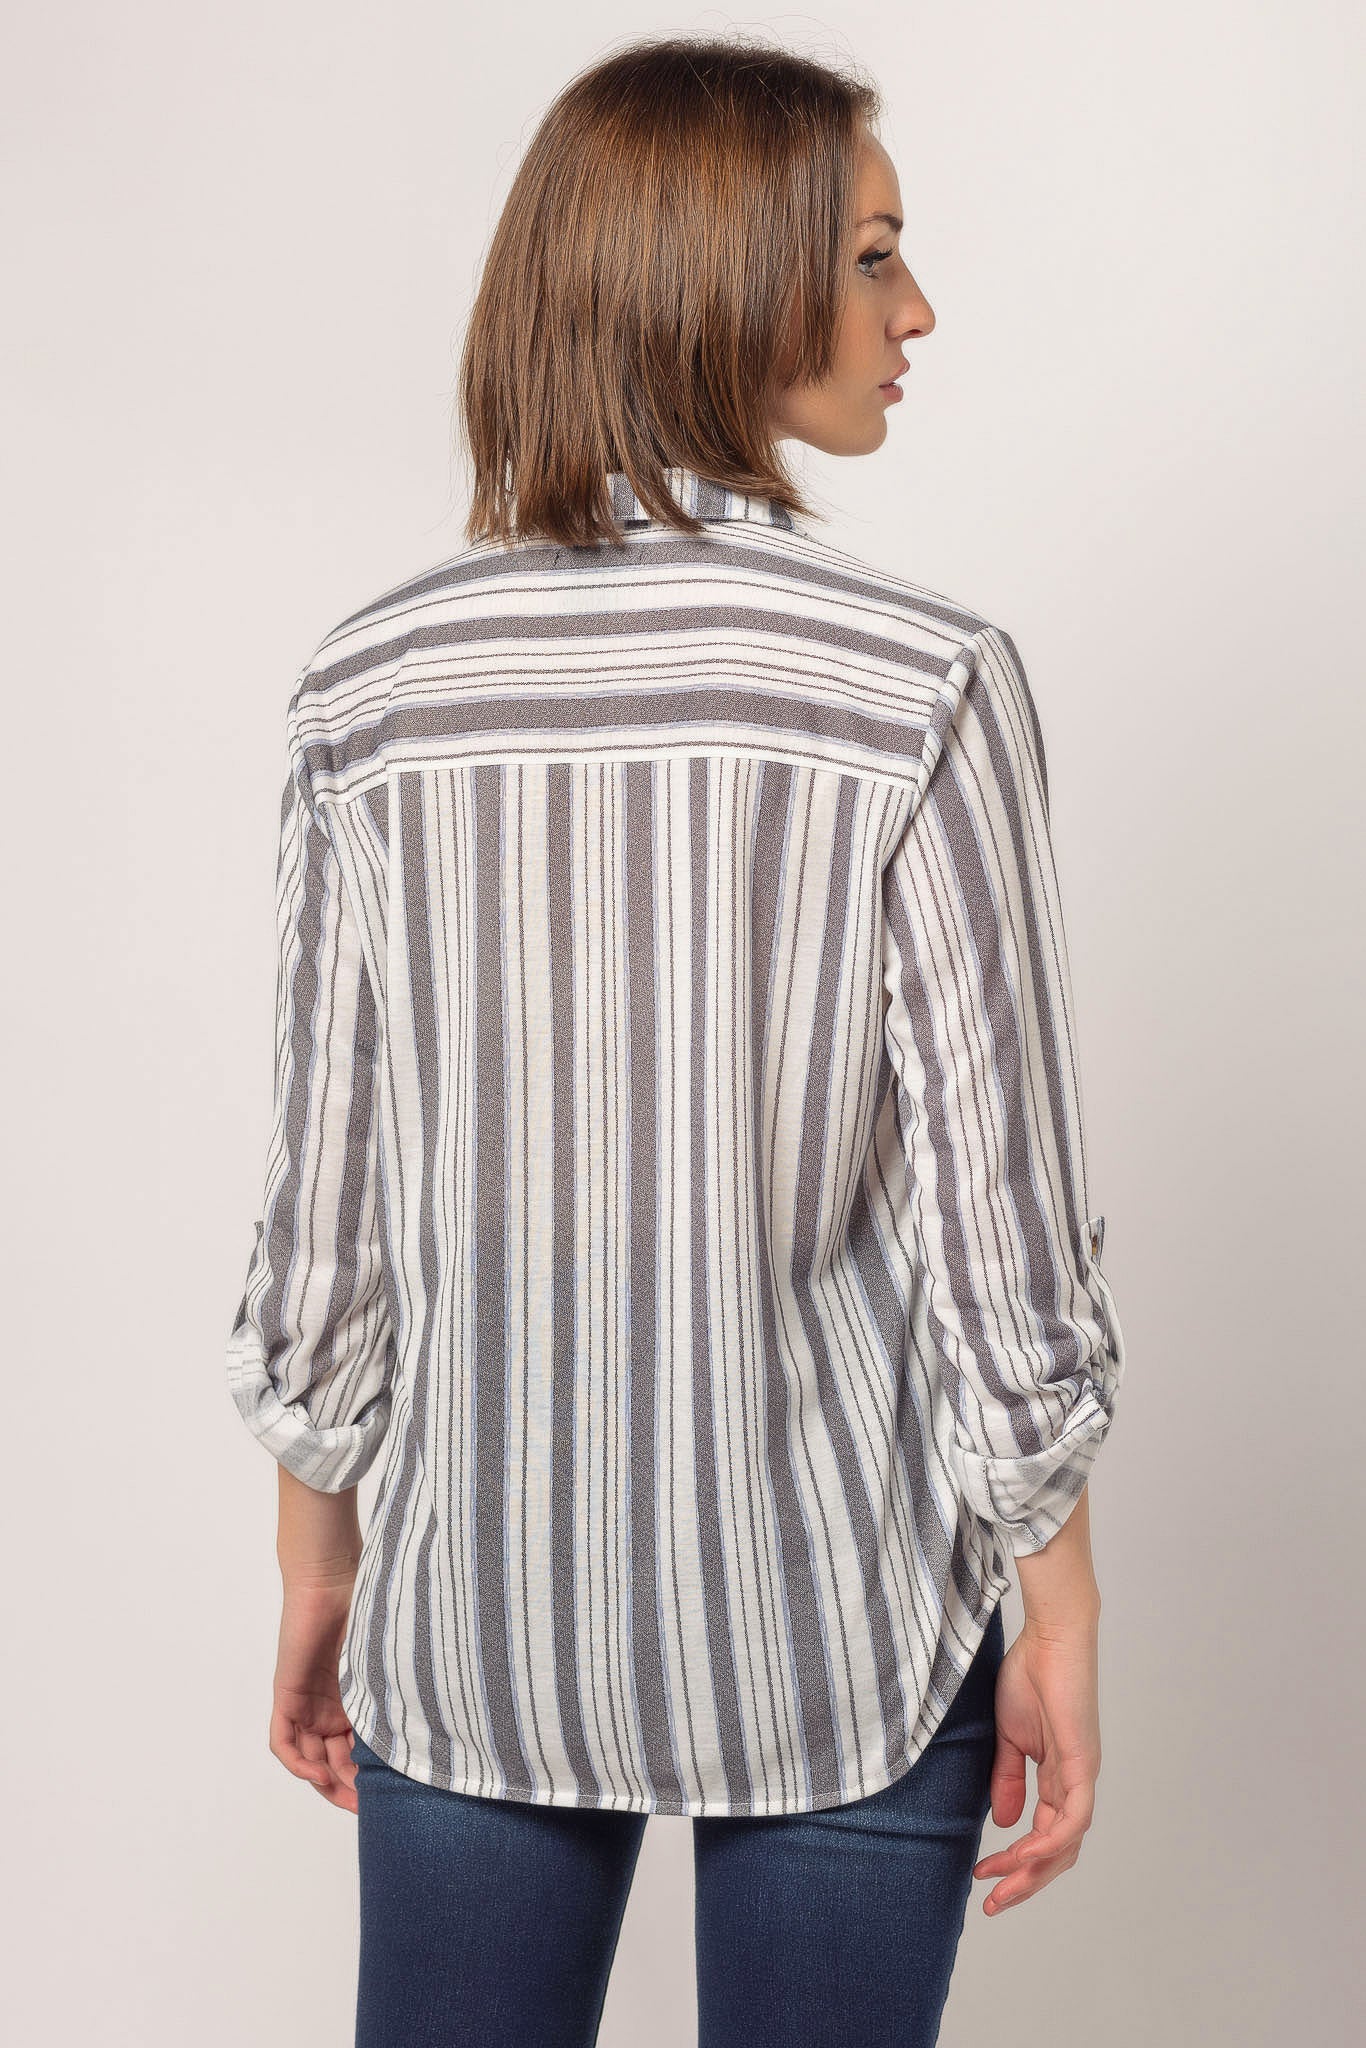 Stripe Knit One-Pocket Shirt with Roll-Up Sleeves